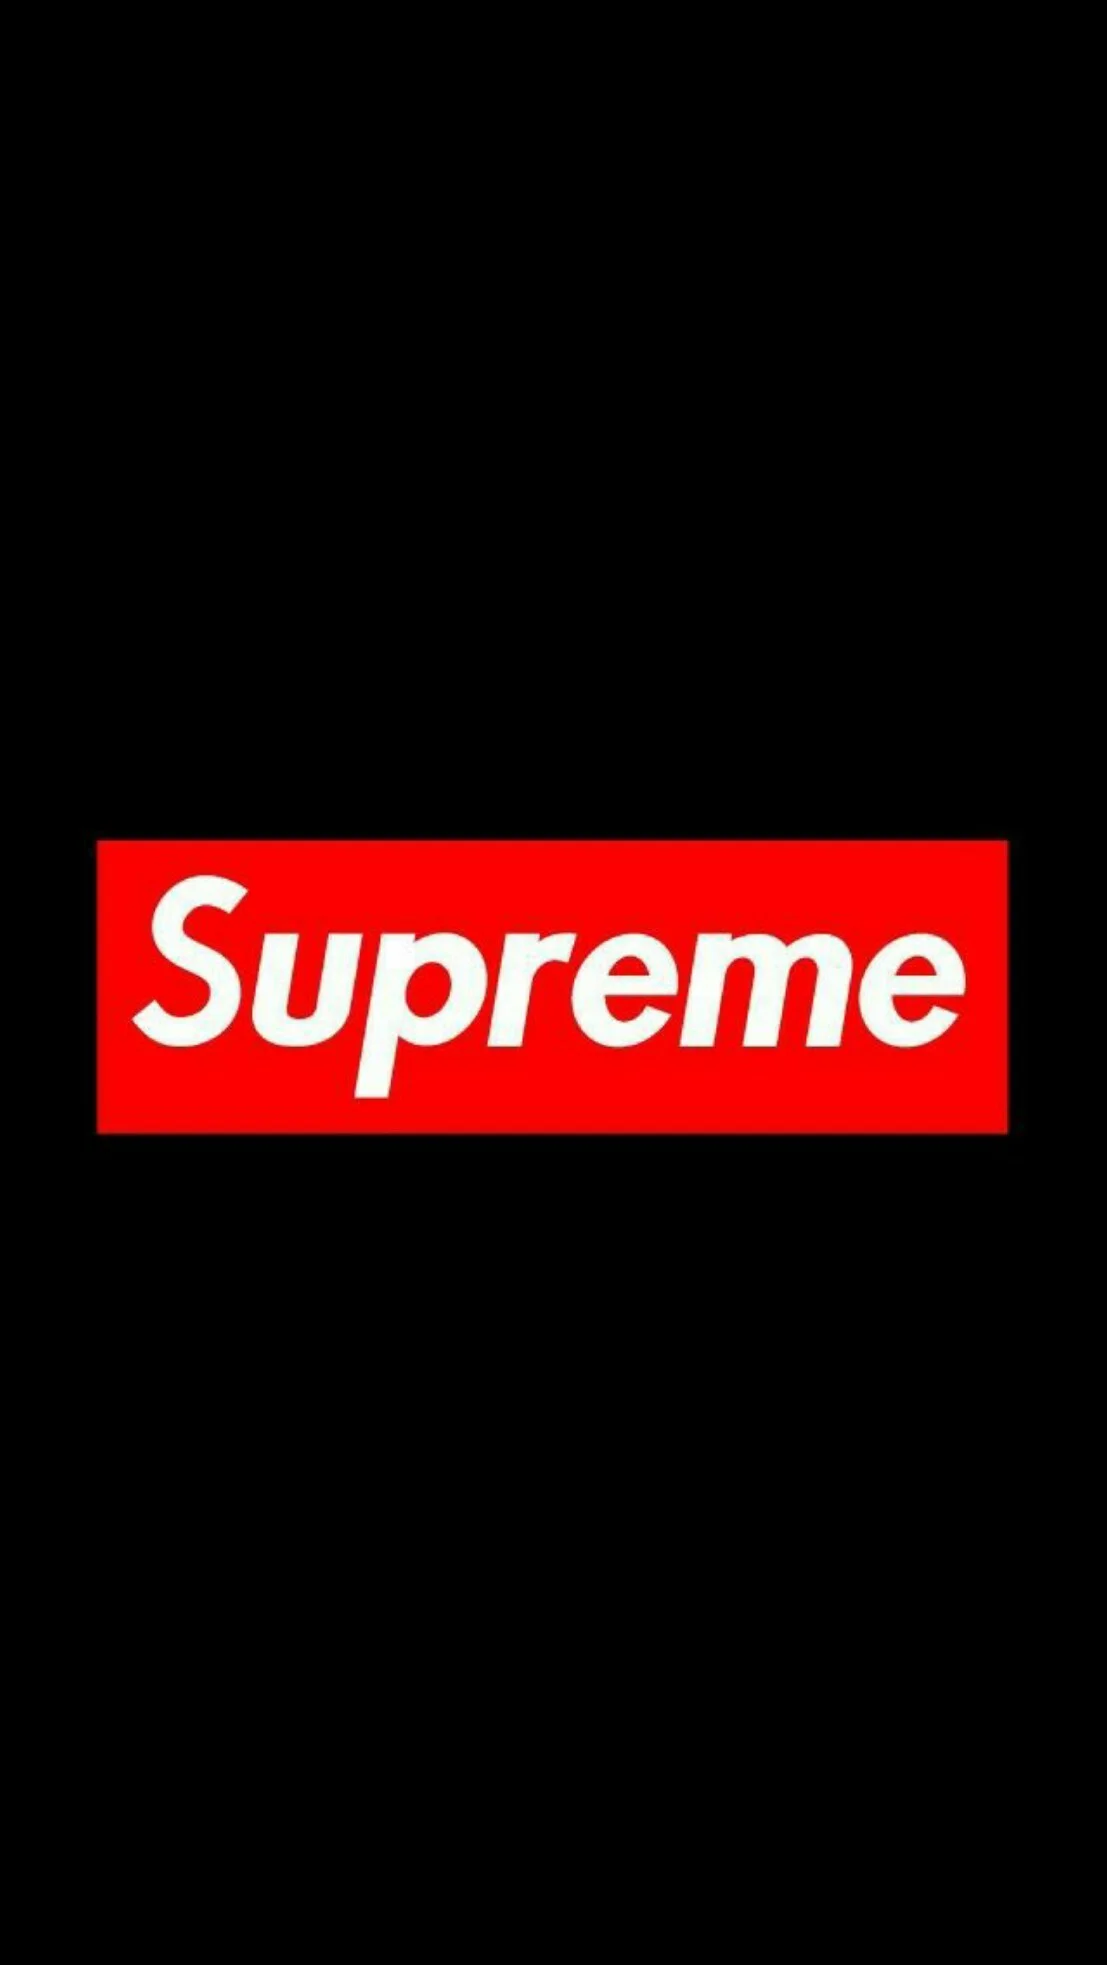 supreme #black #wallpaper #iPhone #android